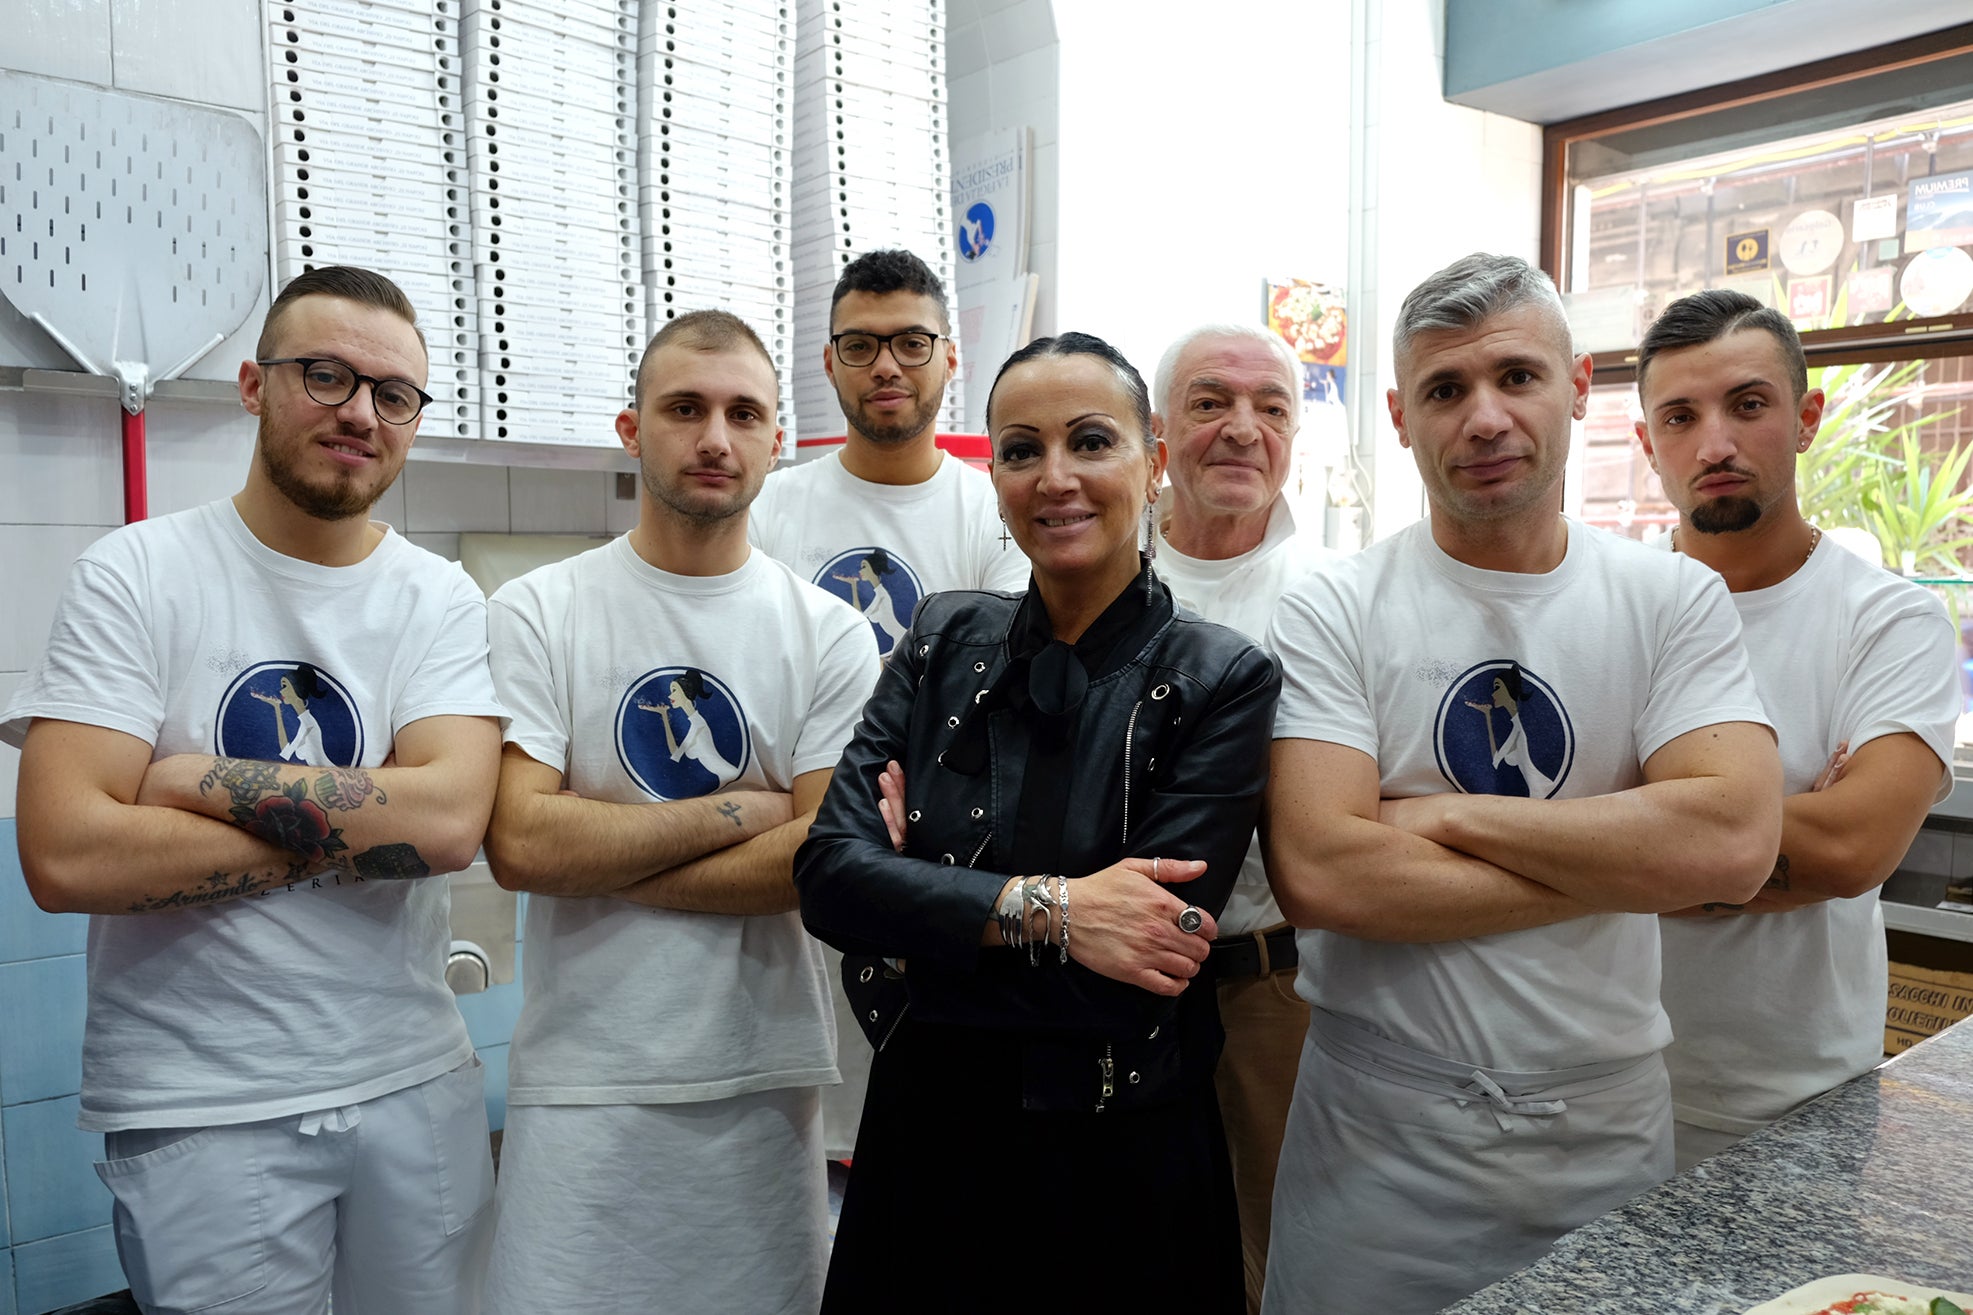 Maria Cacialli is the only woman in a team of 20 pizza makers